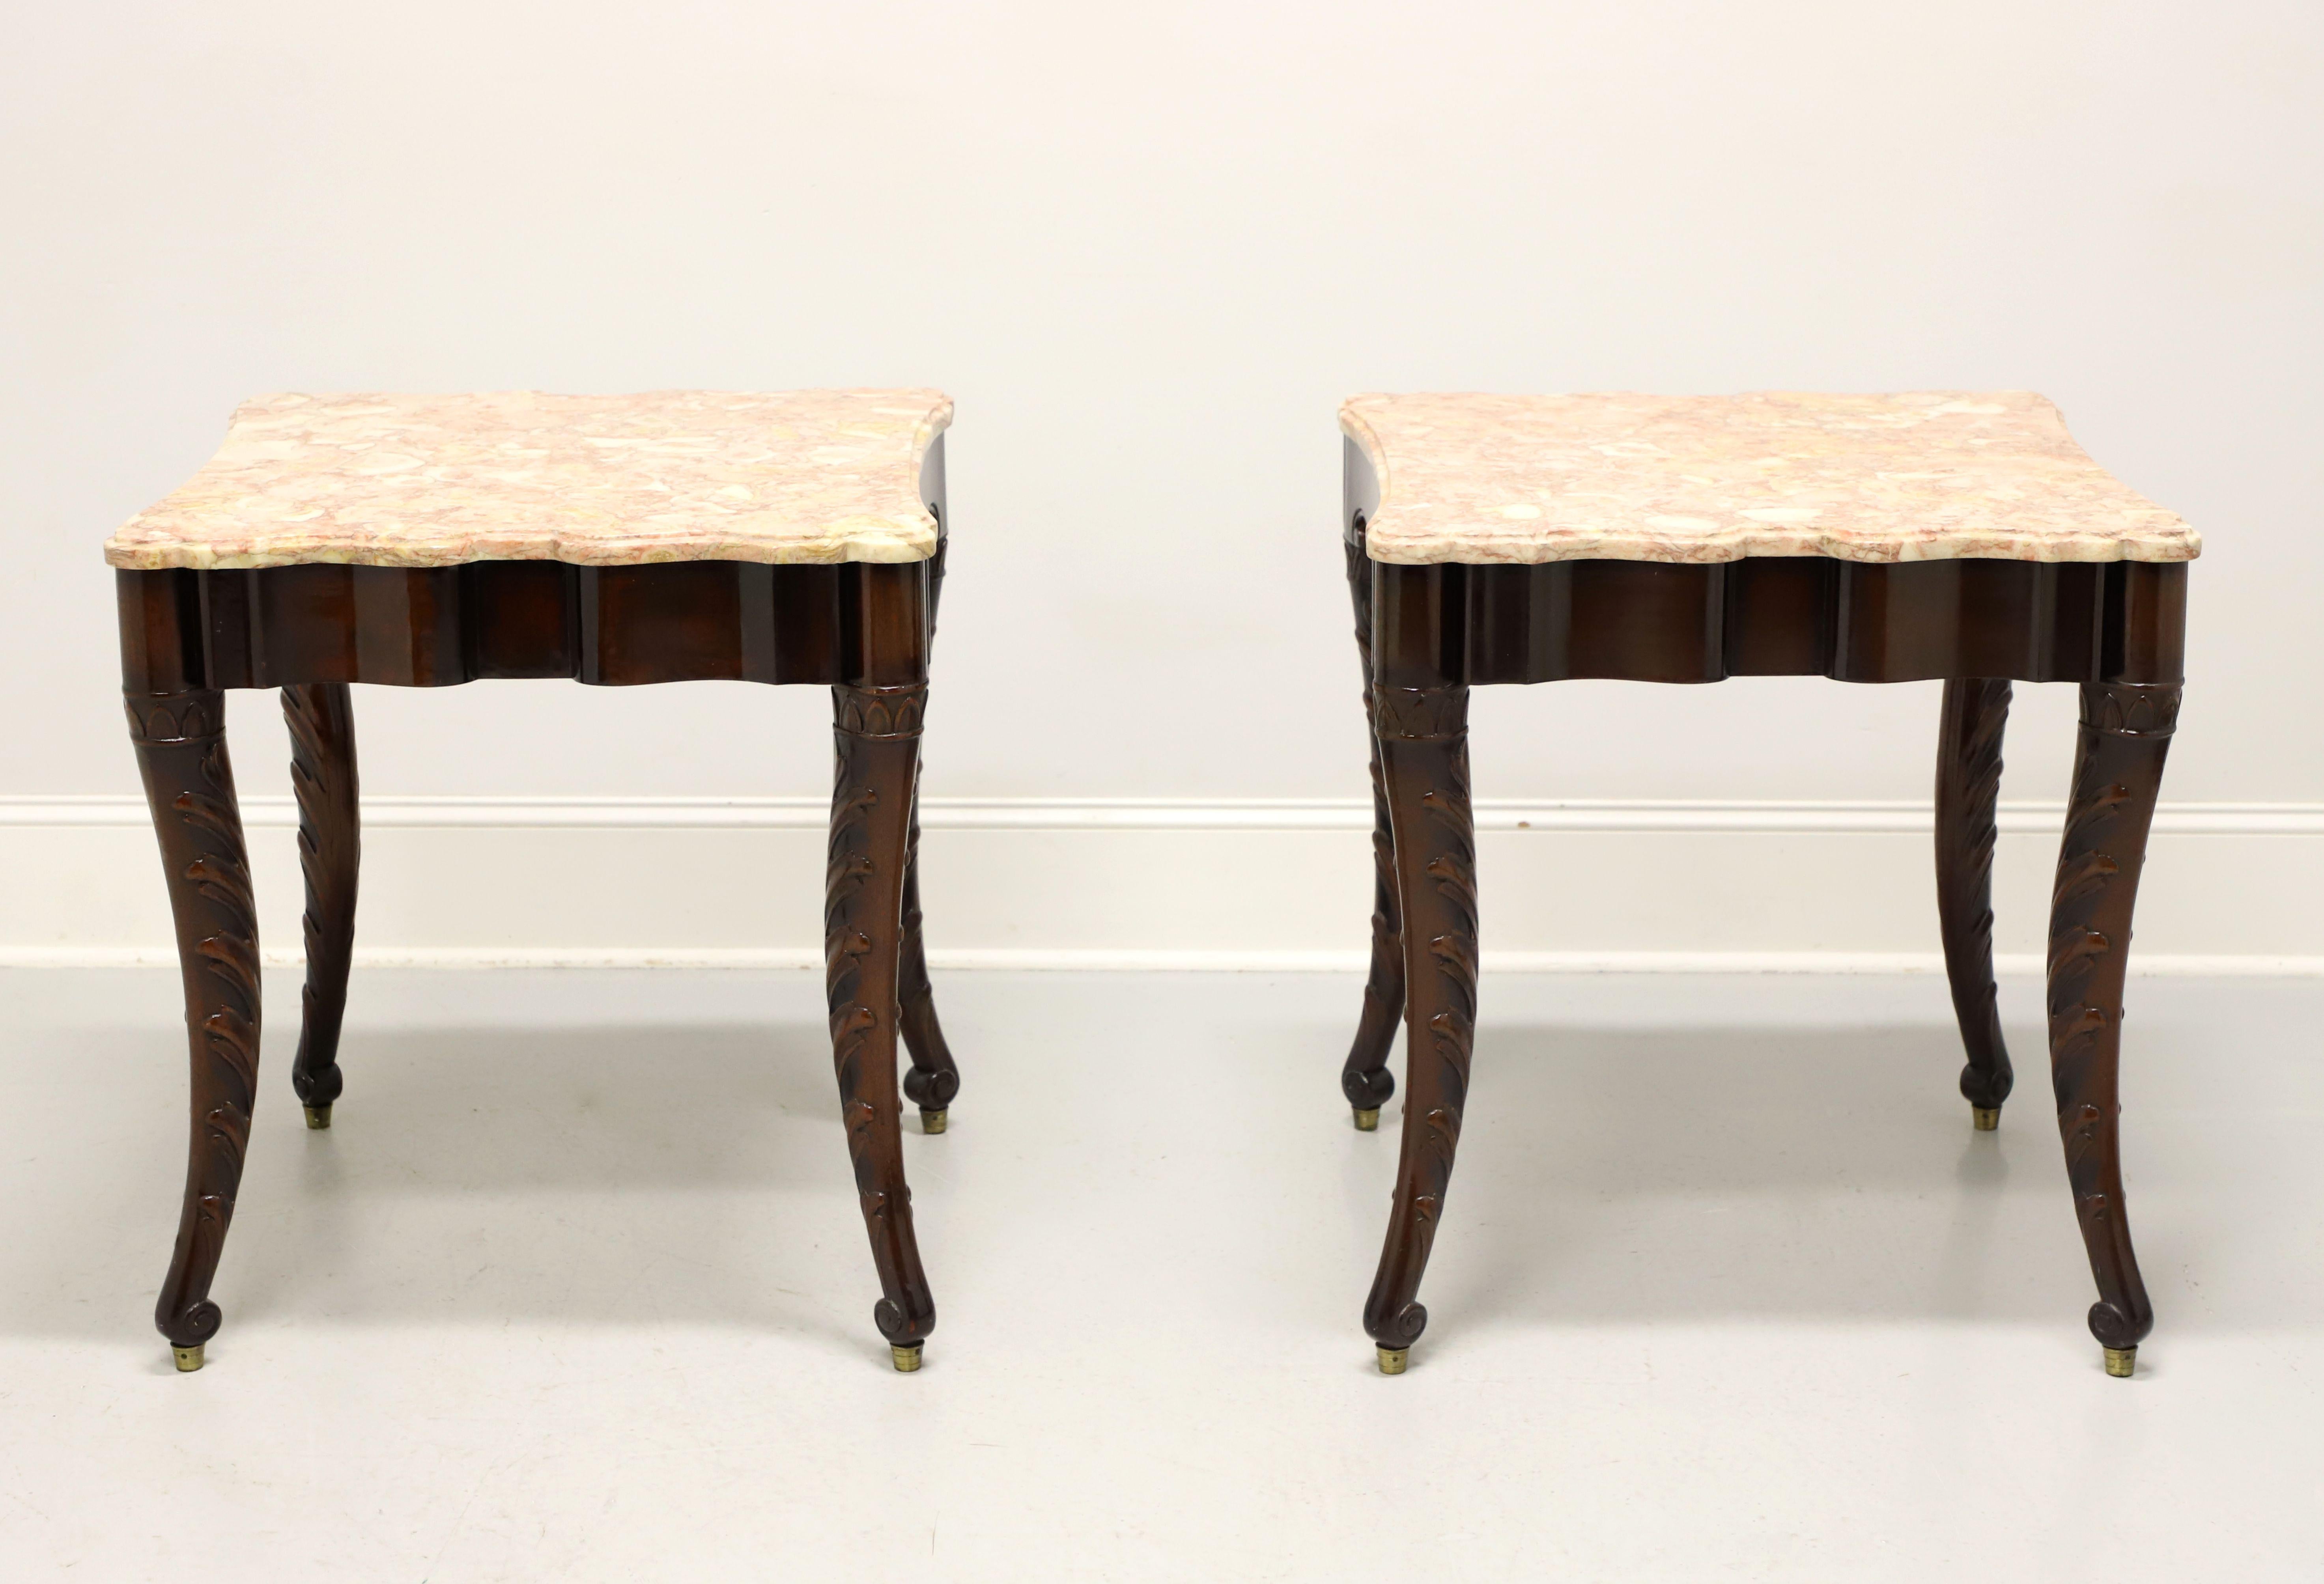 A pair of Regency style large side tables, unbranded. Solid mahogany with a serpentine shaped apron on two sides & carved apron to the other two, beveled edge pink & cream color marble top shaped to match the aprons, and acanthus leaves decoratively